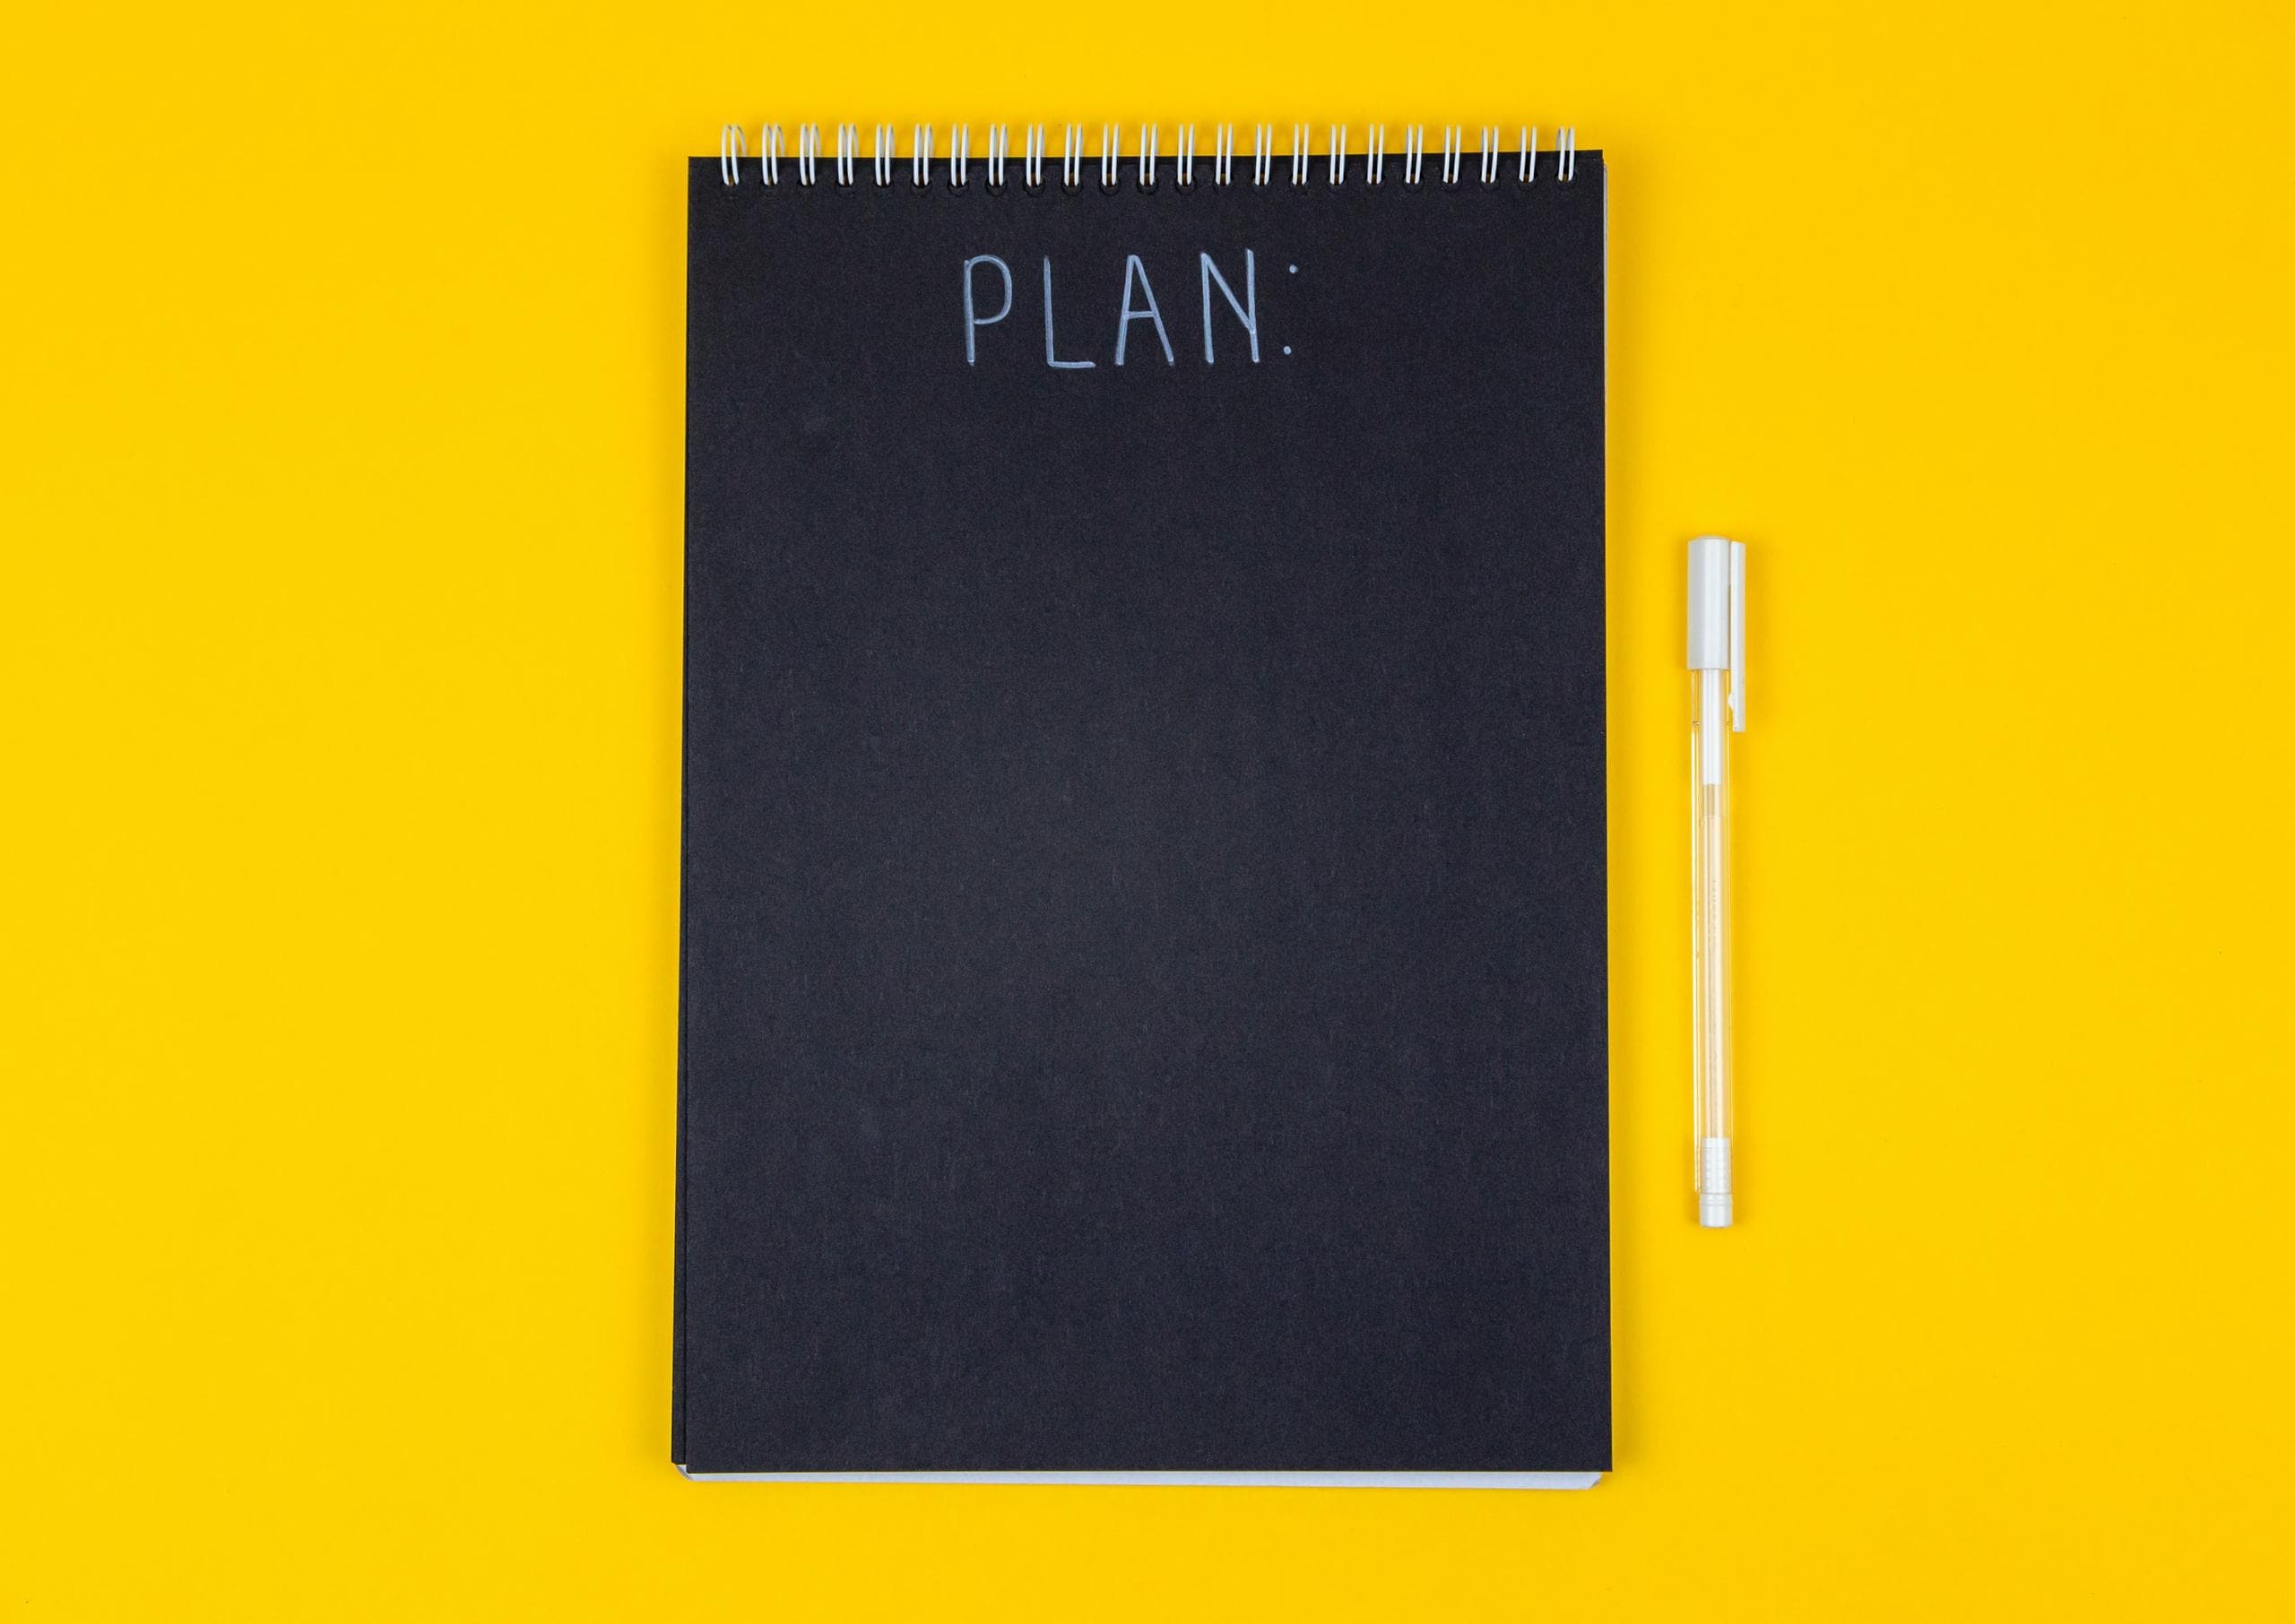 Black notebook on yellow background with a pen next to it